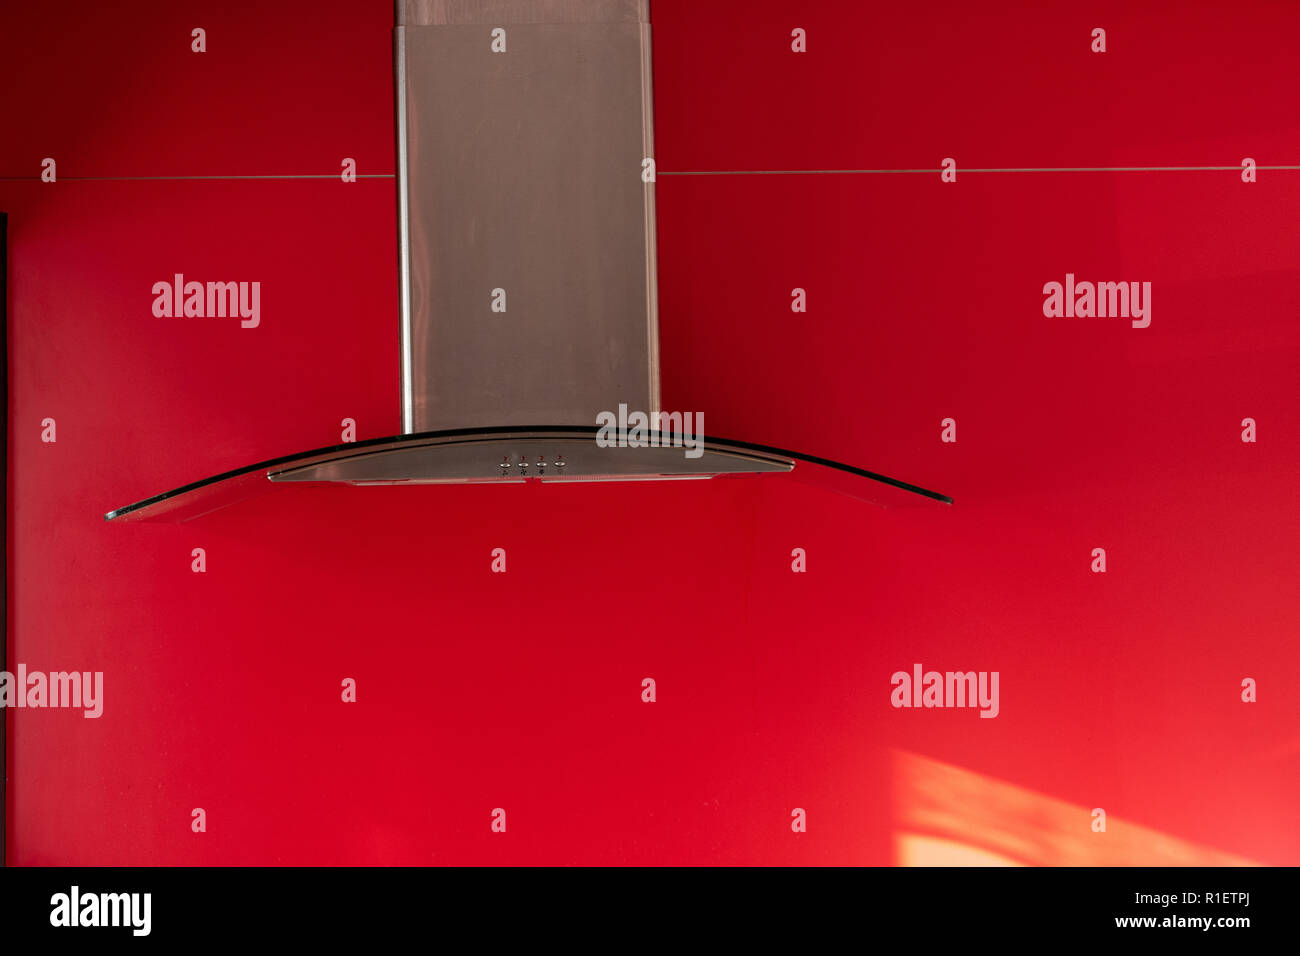 Kitchen rangehood made with chrome exhaust shaft and curved glass hood against a red background Stock Photo